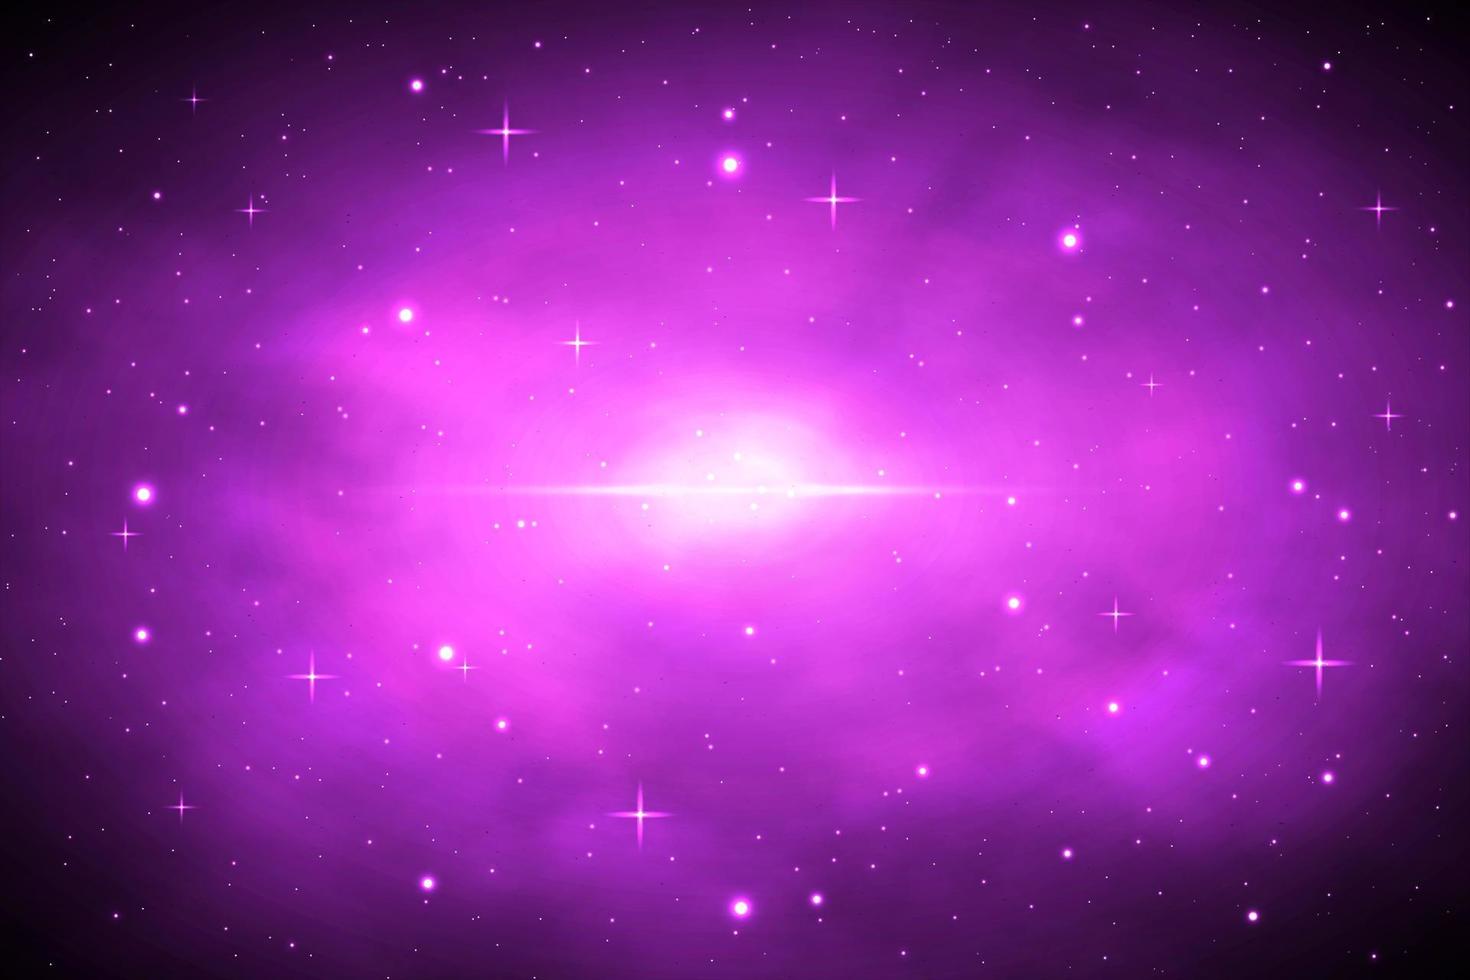 galaxy background with falling star, Vector space galaxy illustration